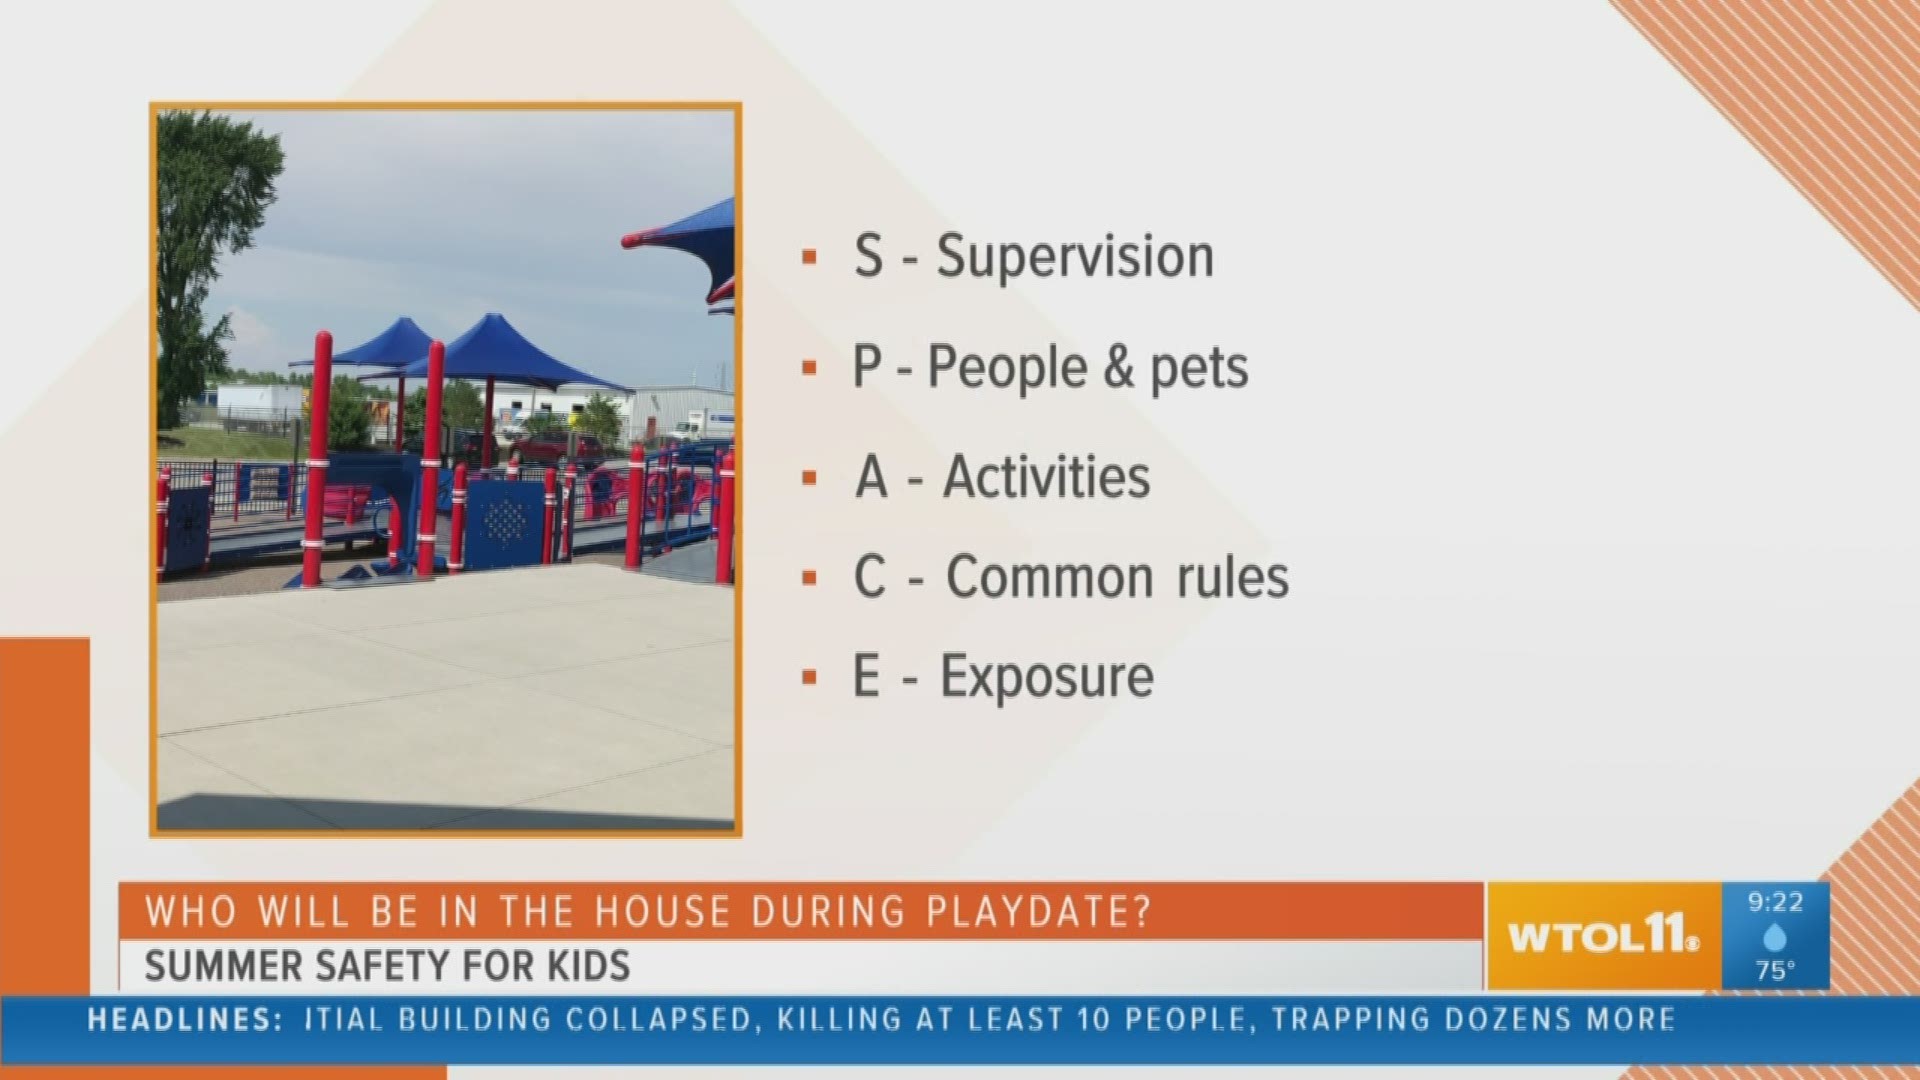 Dr. Victoria Kelly talks about how you can keep your kids safe during the summer.